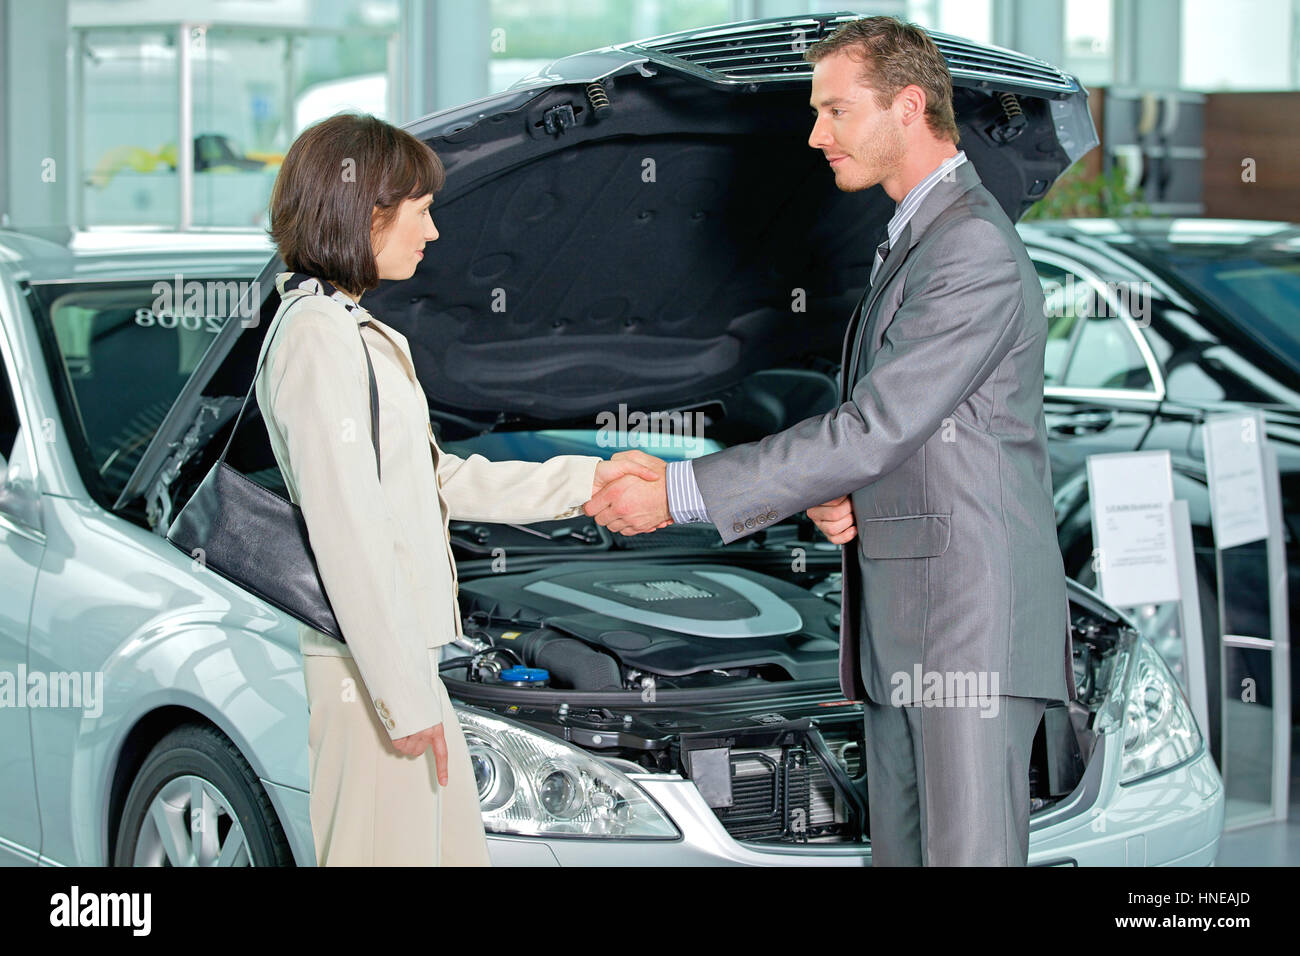 Car salesperson shaking hands with customer at showroom Stock Photo